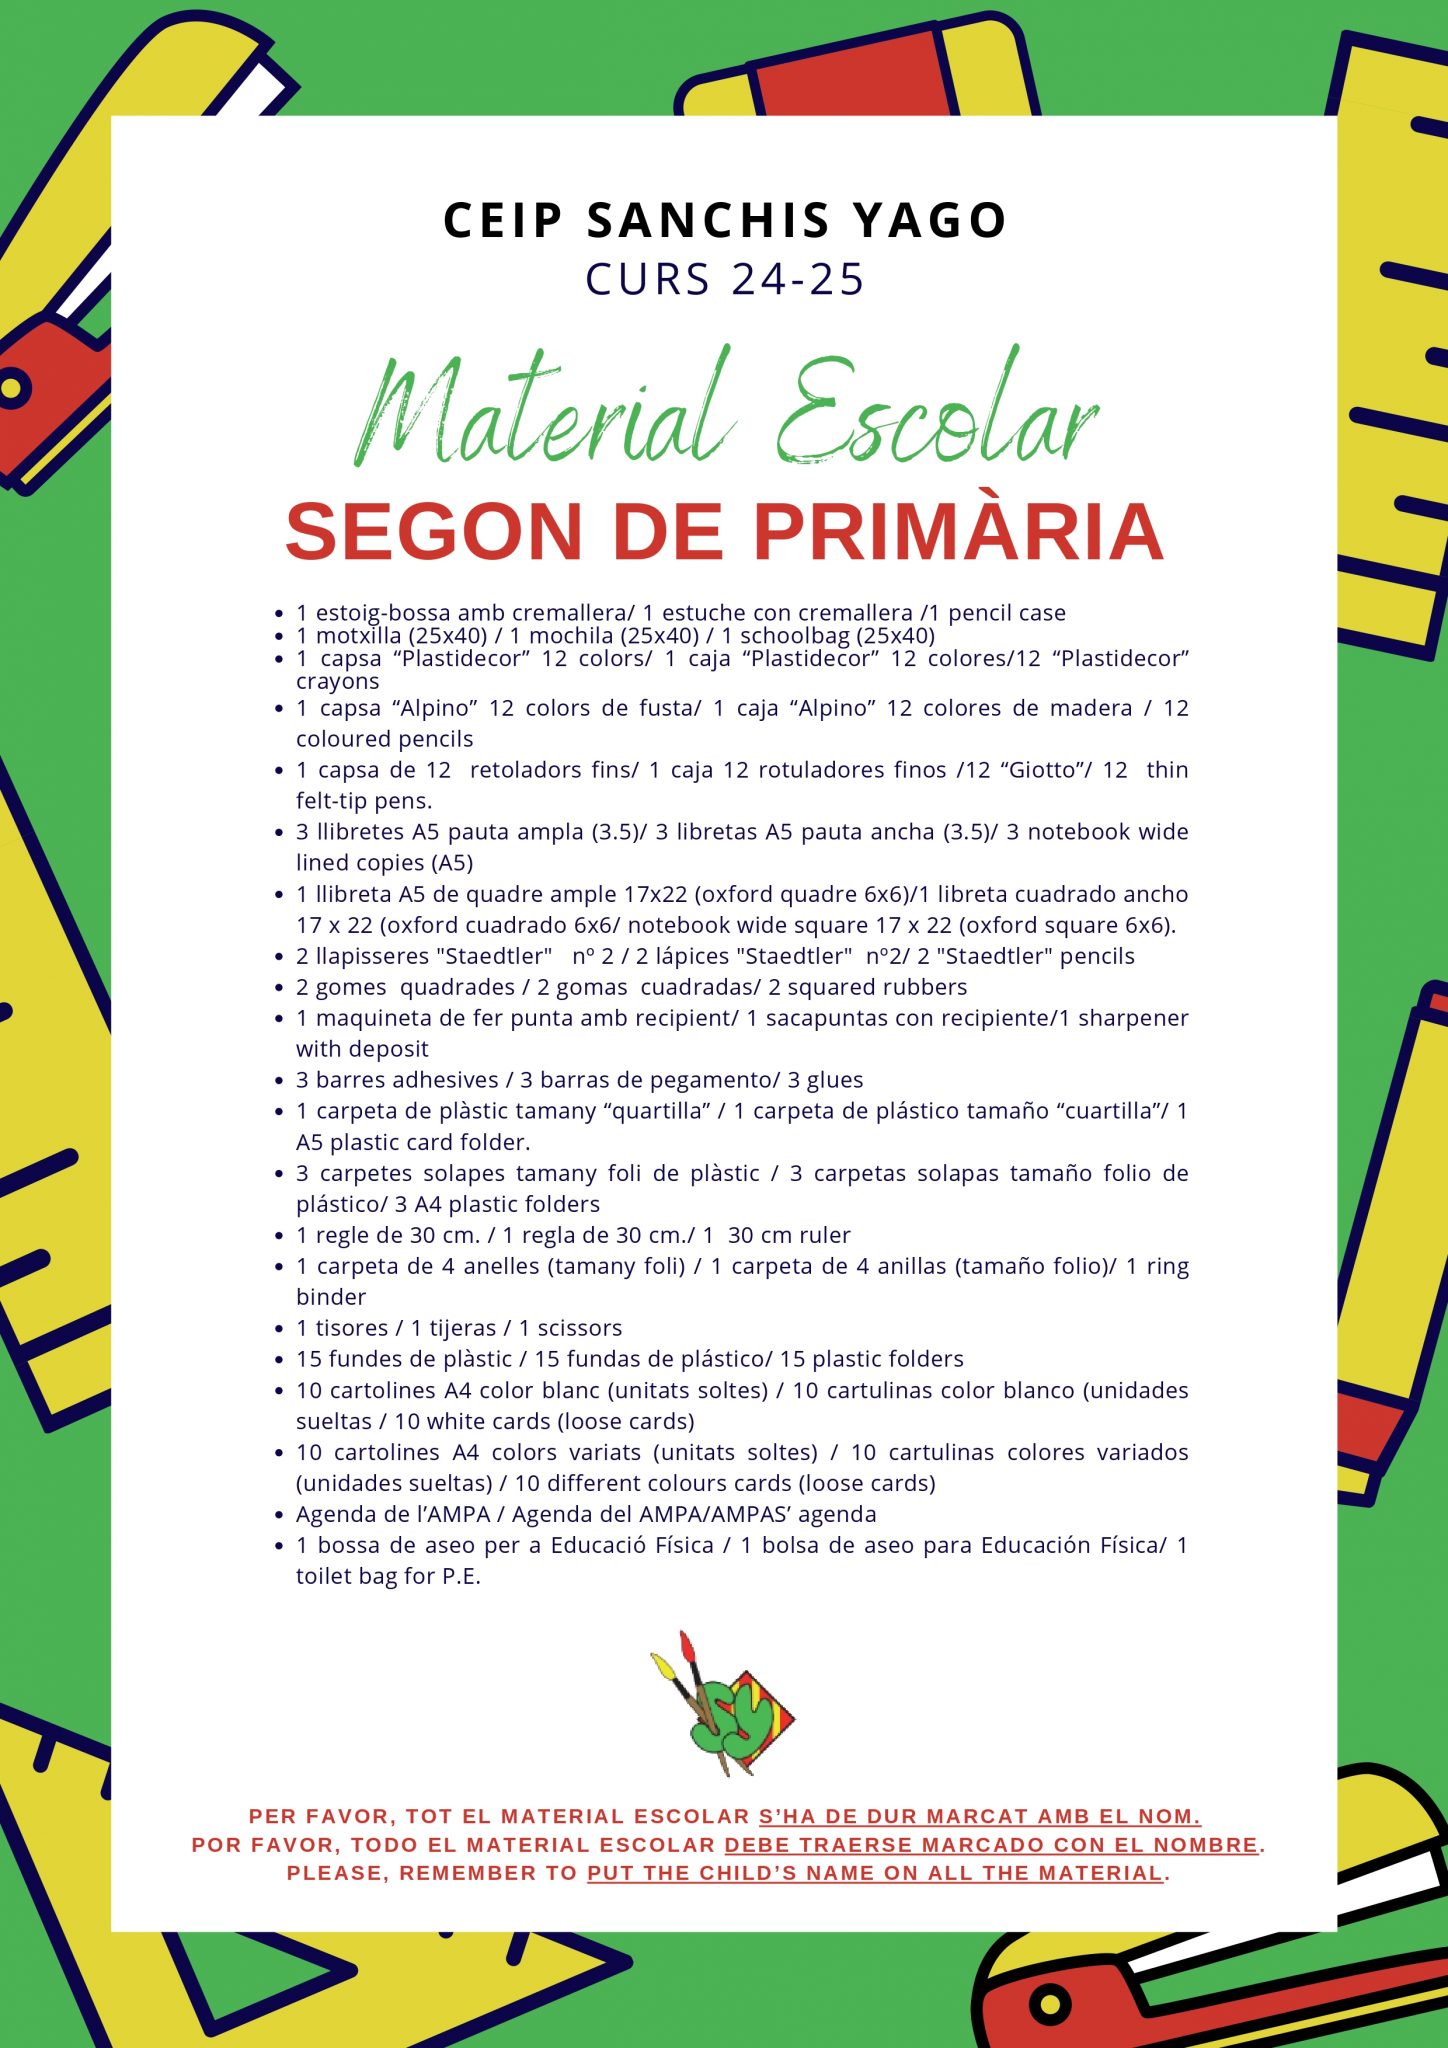 Material Escolar_24-25_pages-to-jpg-0002